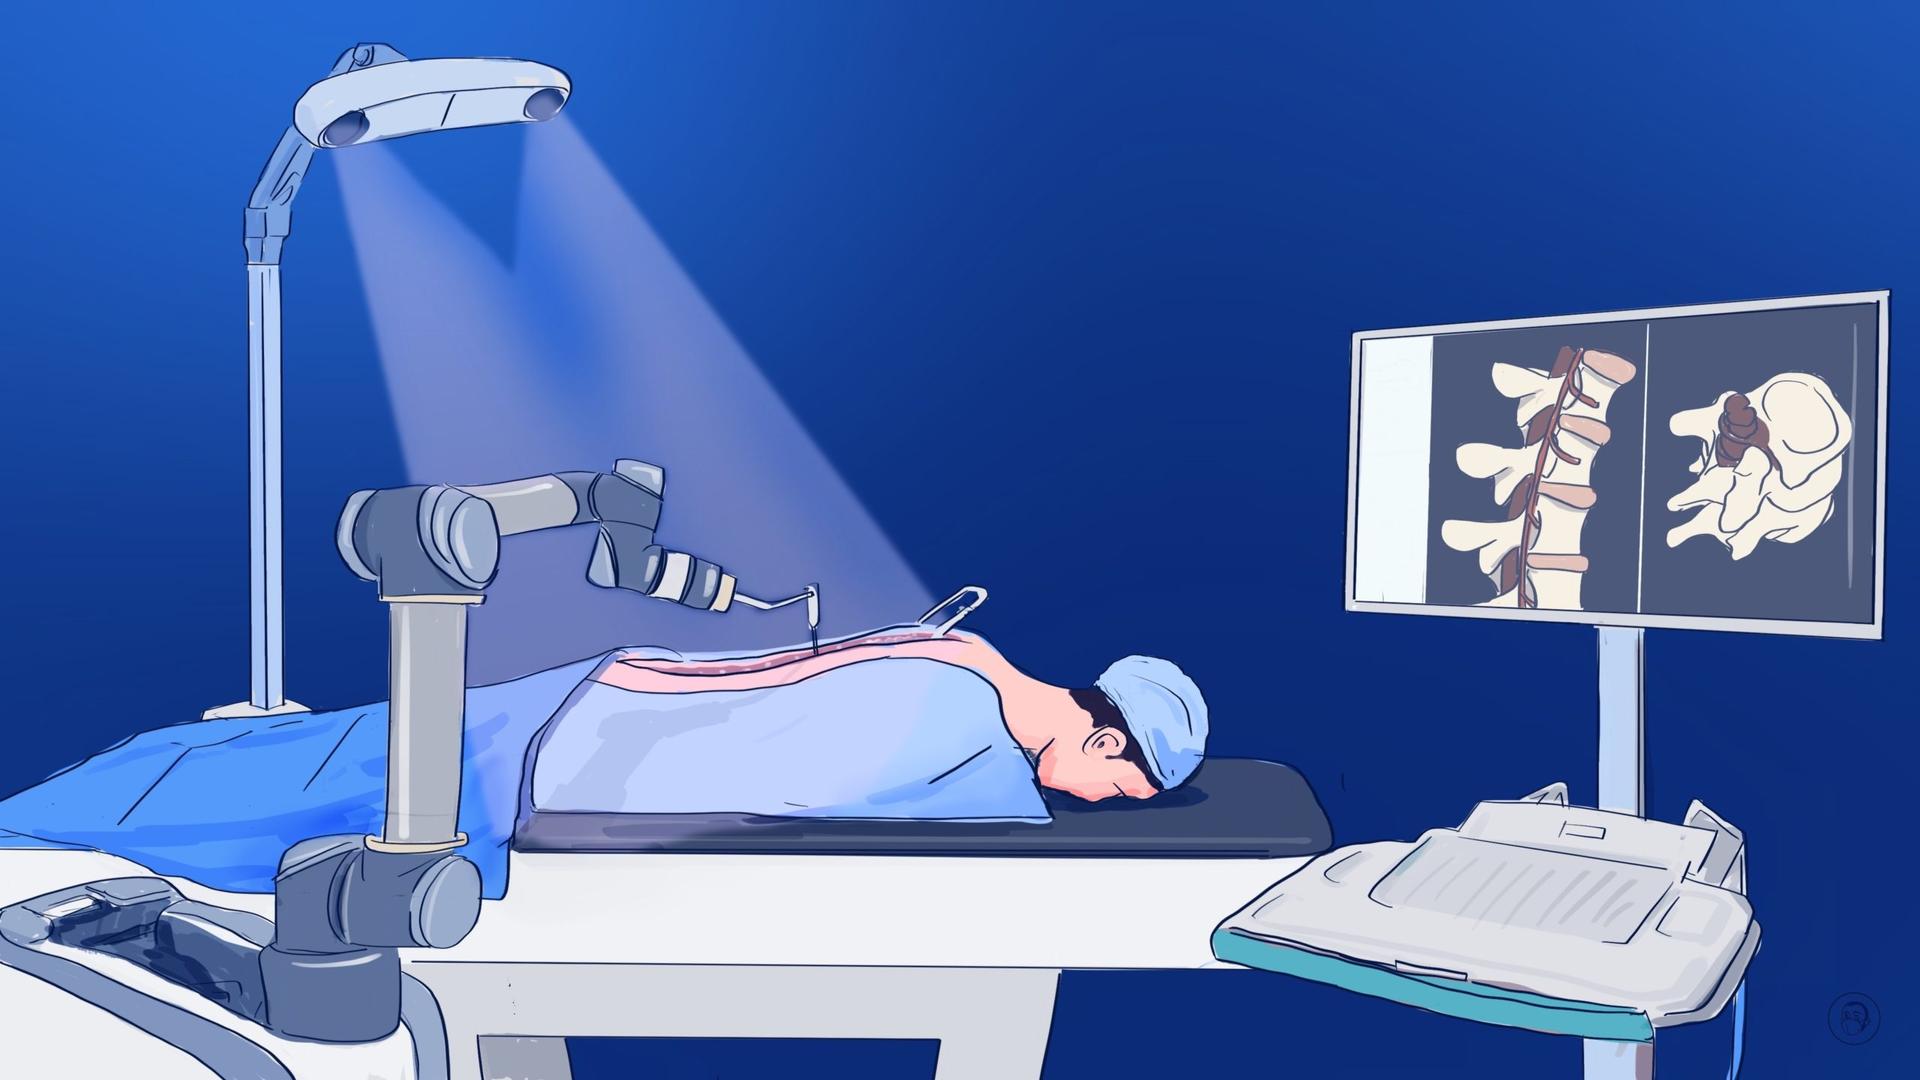 An illustration by Alex Santafe depicting a medical robot performing an operation